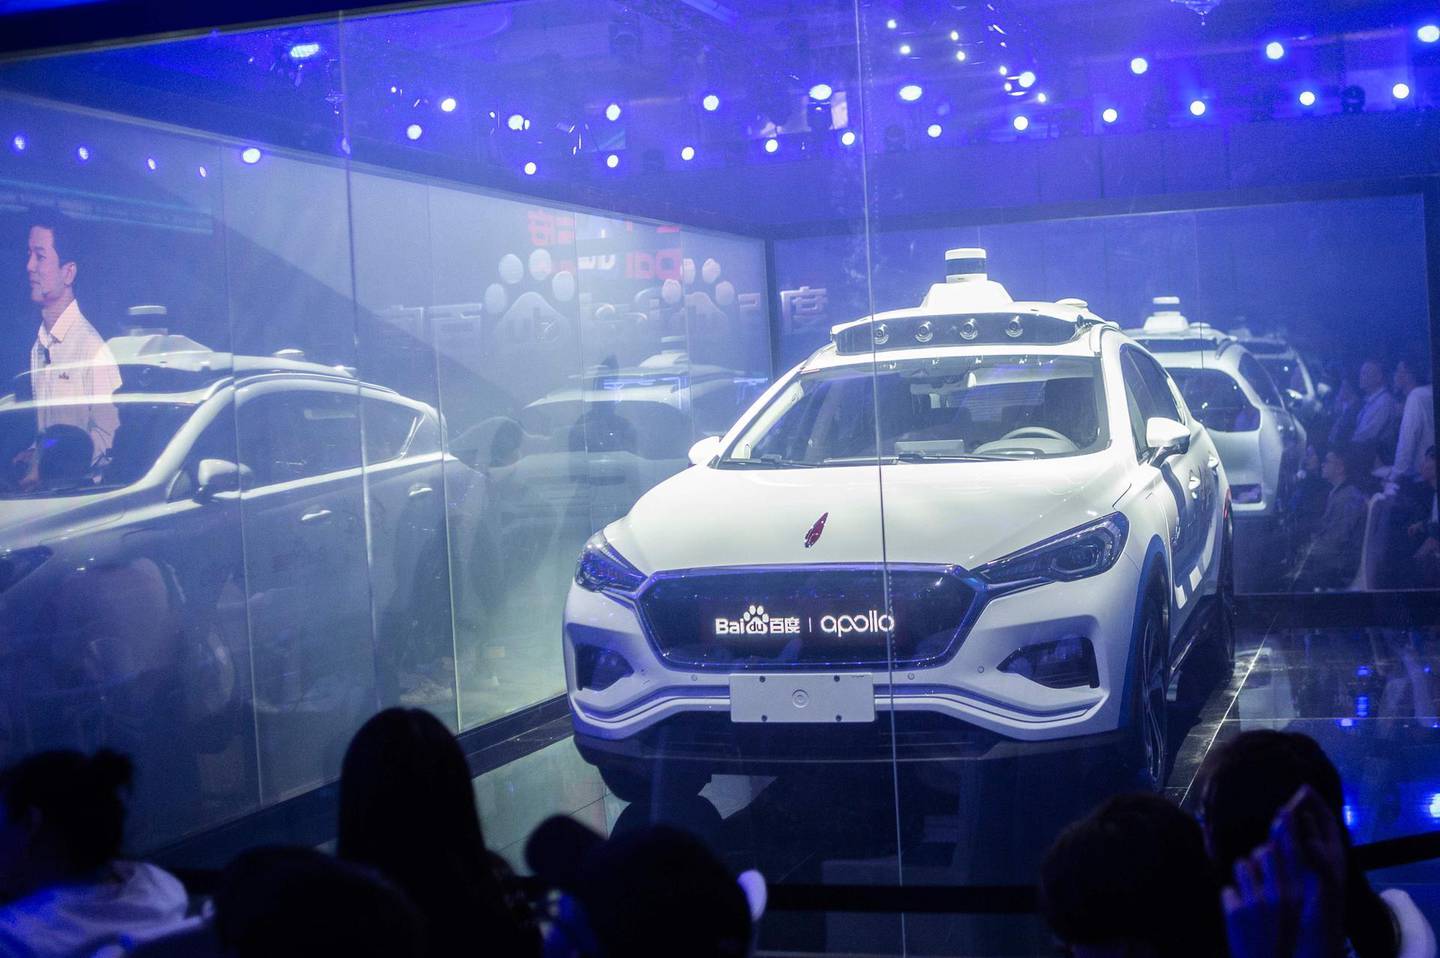 The Baidu Apollo car is displayed during the annual Baidu World Technology Conference in Beijing on November 1, 2018.  The car will utilise Baidu's autonomous driving technology. / AFP / Fred DUFOUR
